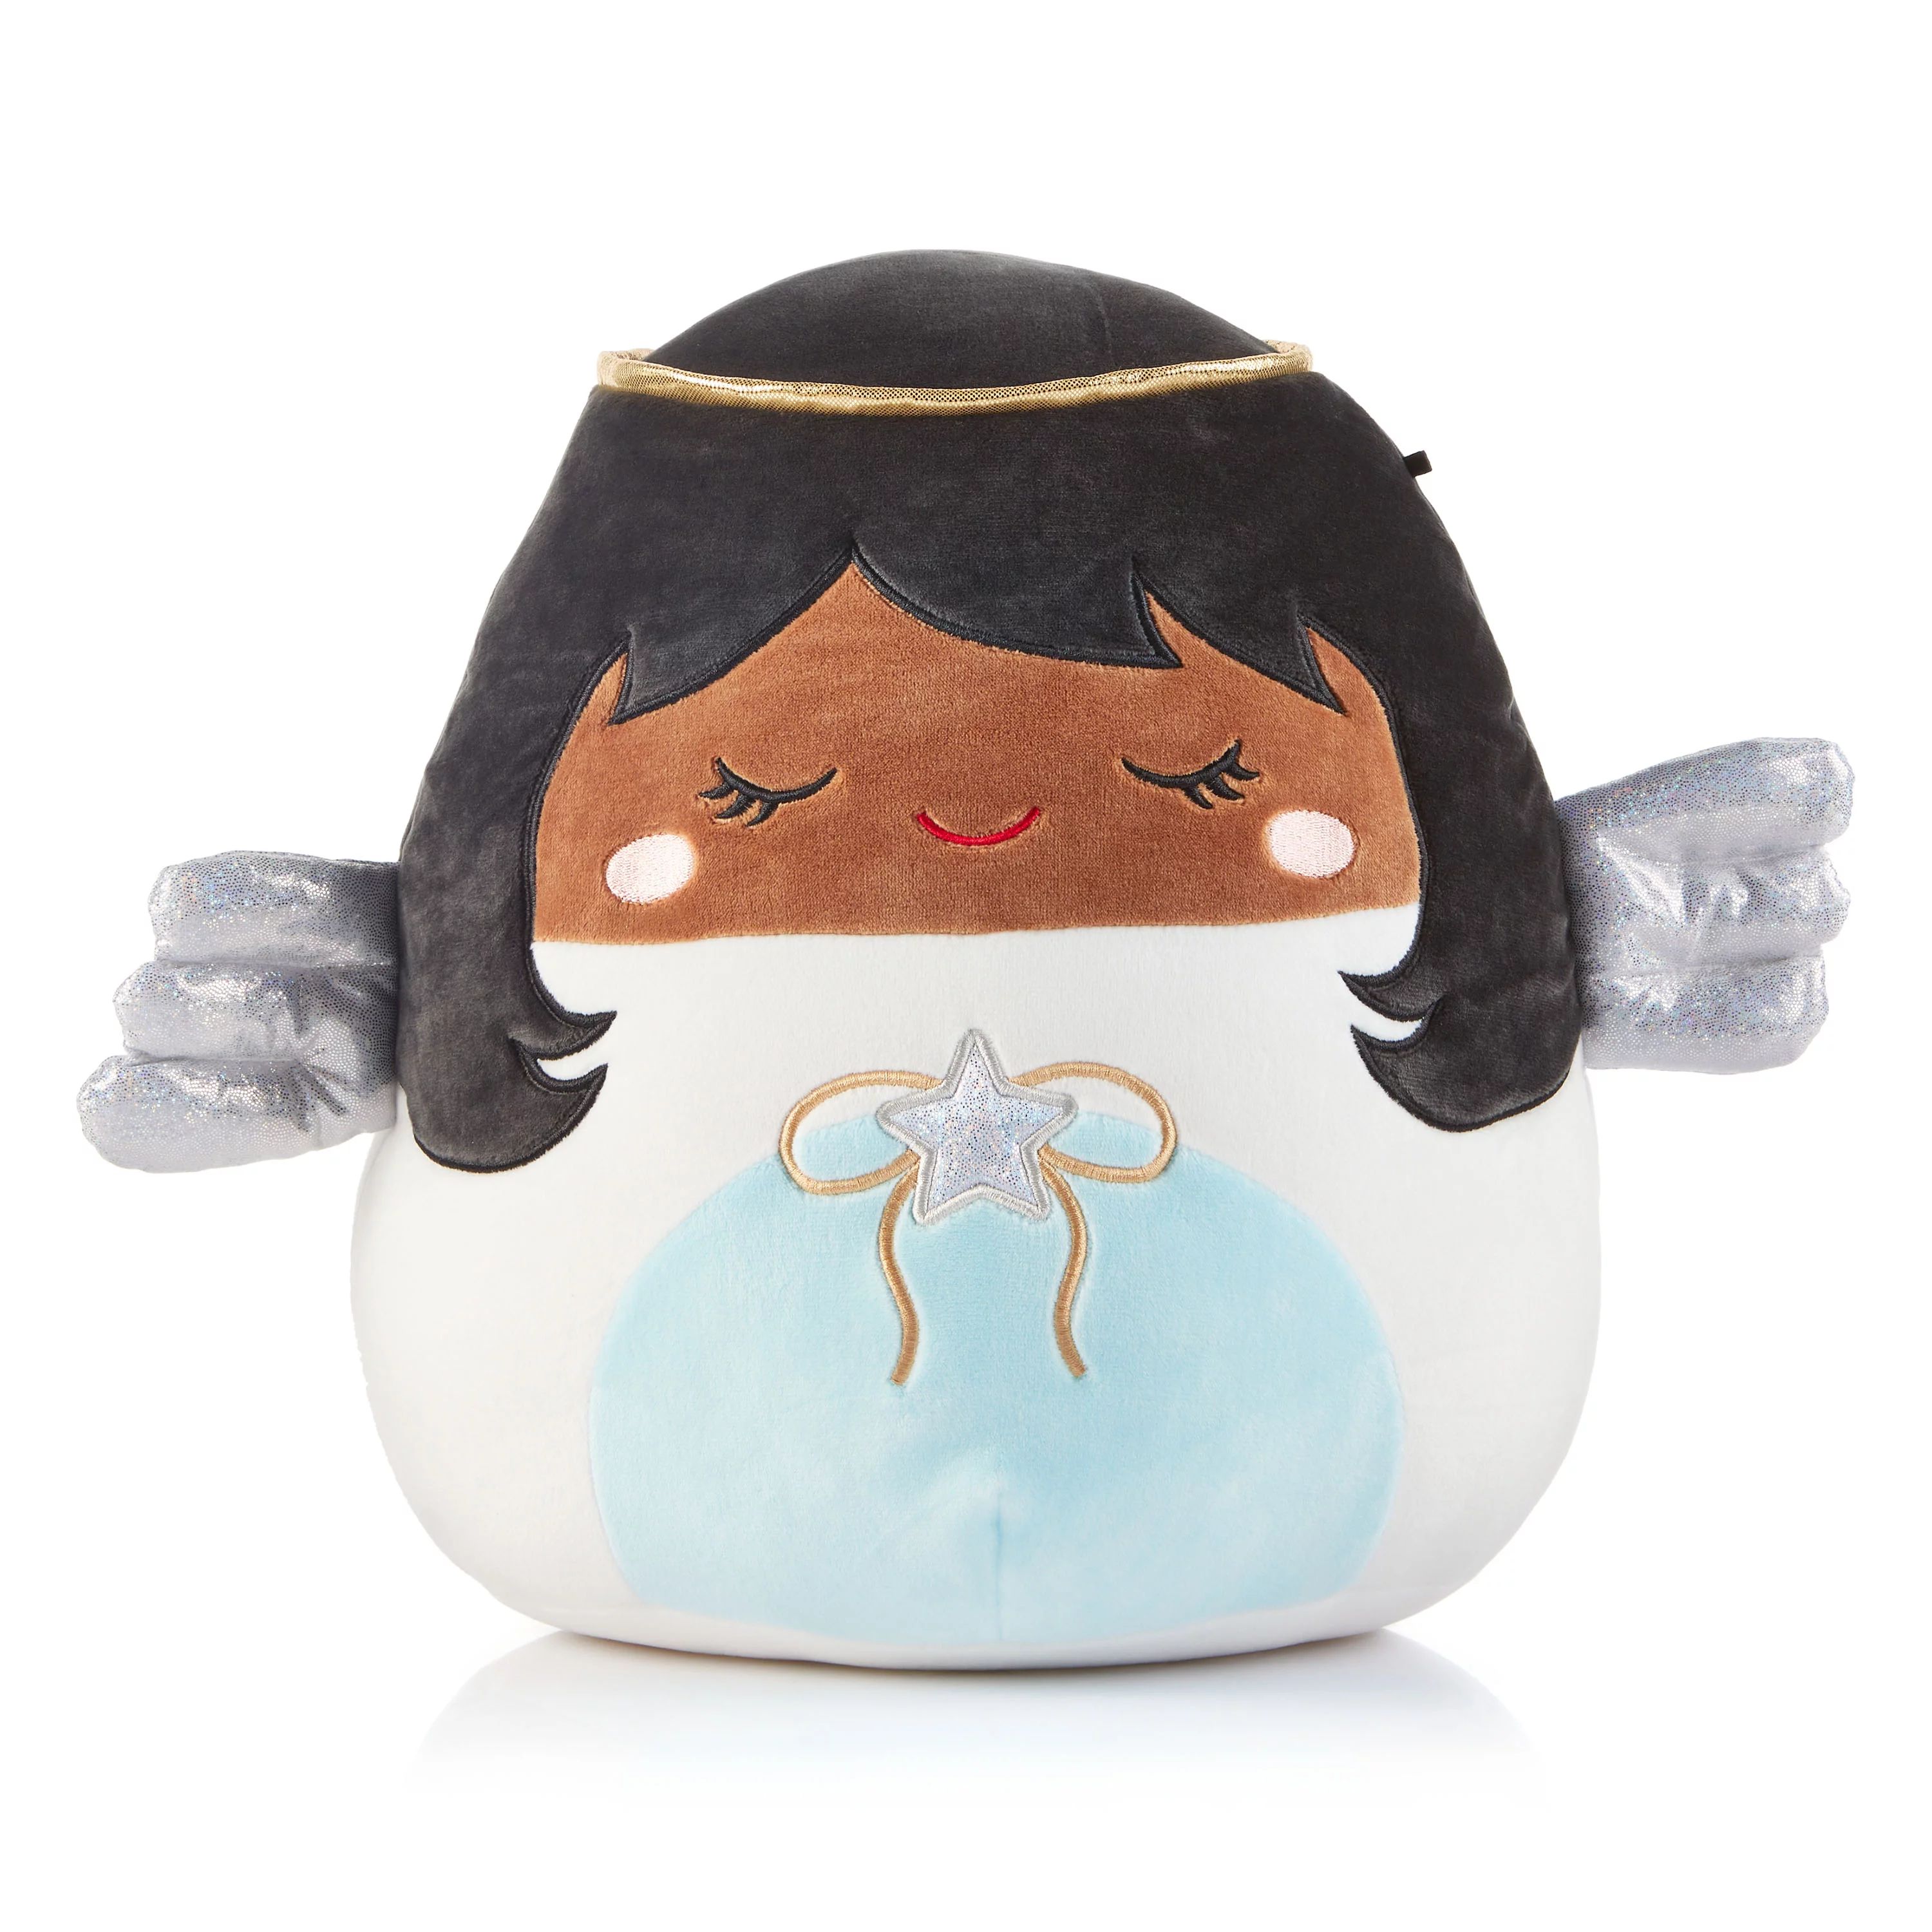 Squishmallows Plush 12" Thandie The Angel - Add This Ultrasoft Holiday Plush Toy To Your Squad To... | Walmart (US)